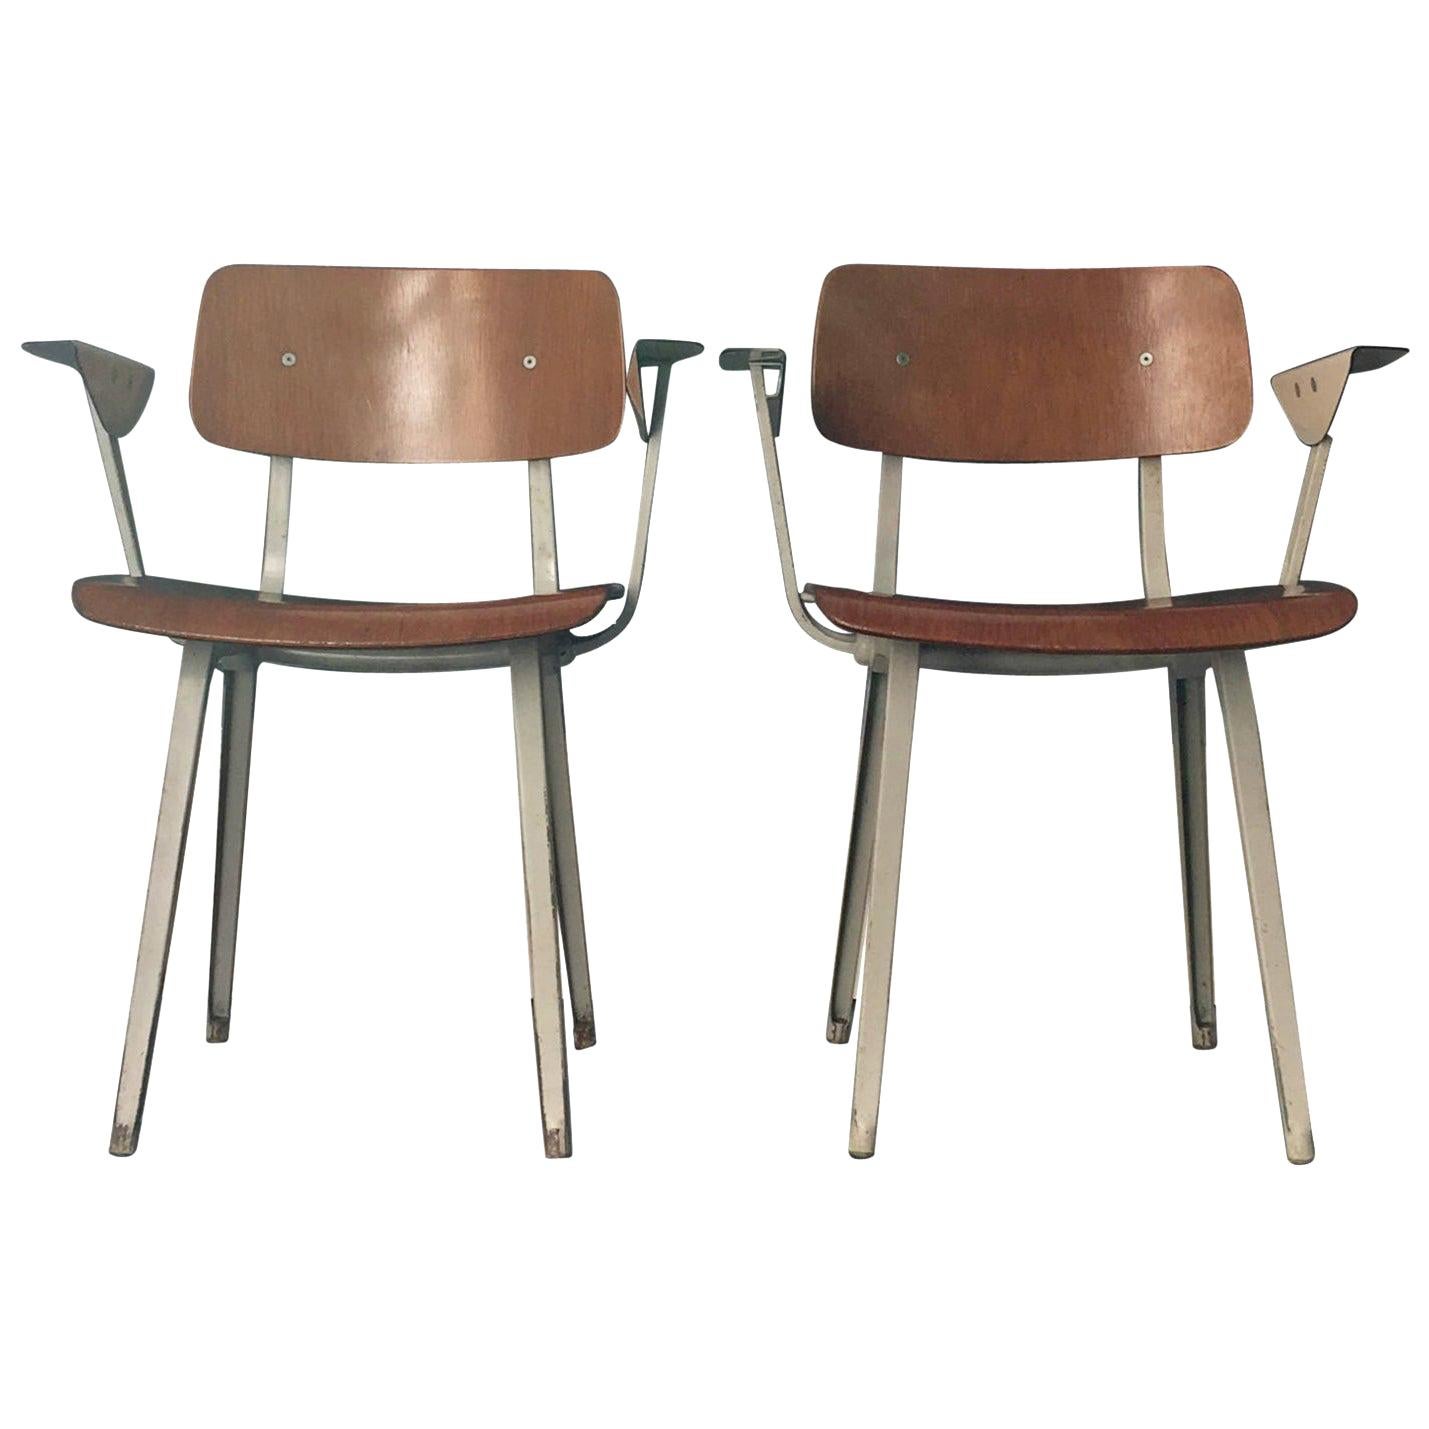 Set of Two Plywood Revolt Chairs with White Arms, by Friso Kramer, Netherlands